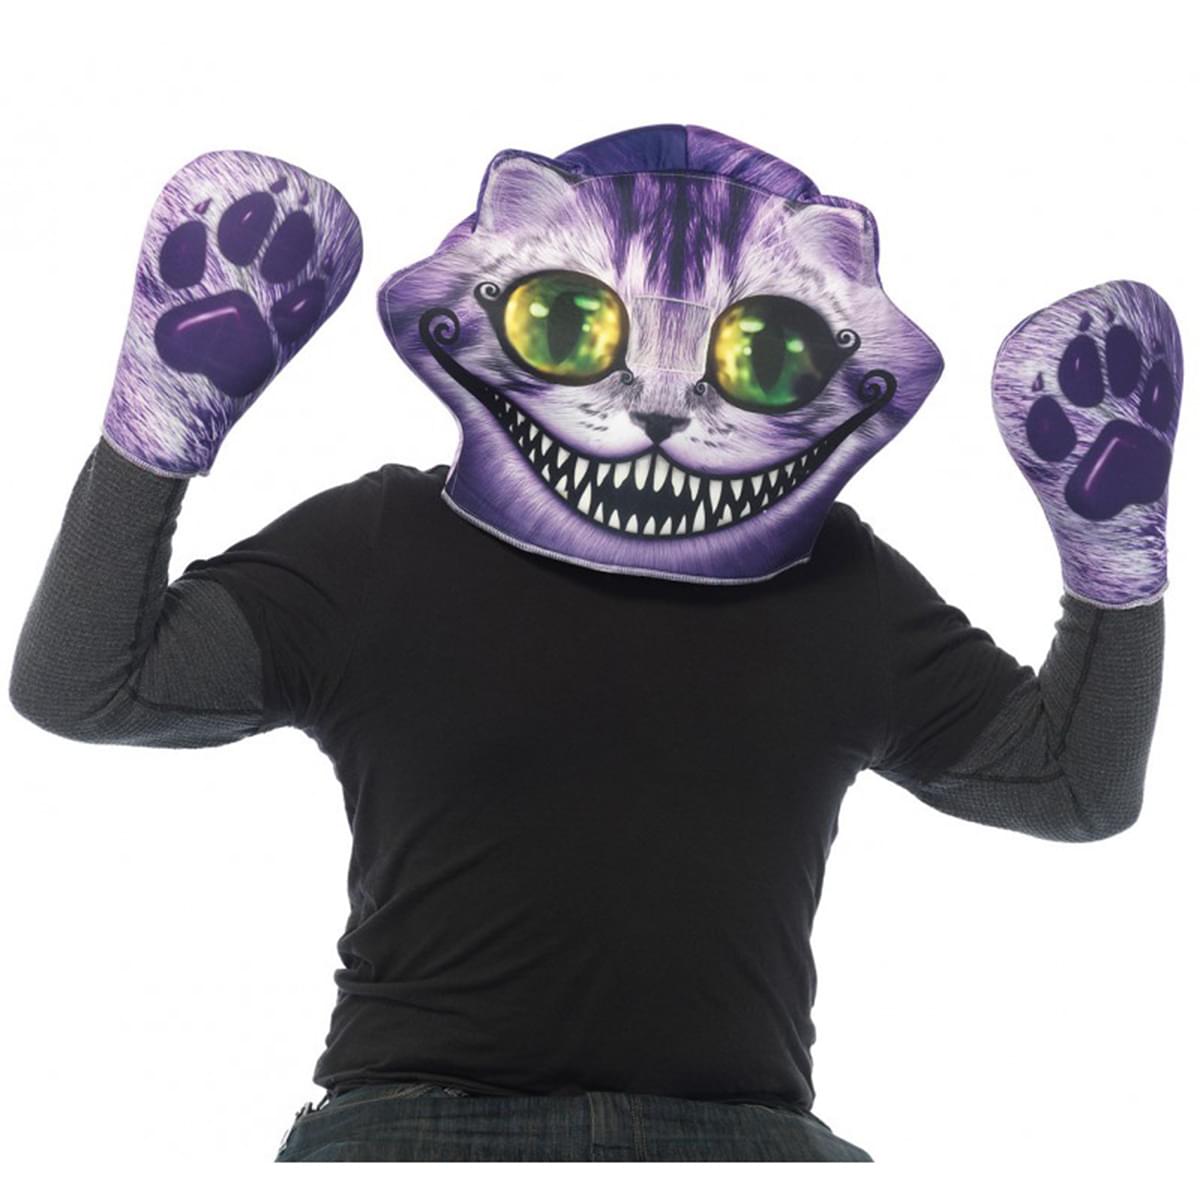 Alice in Wonderland Cheshire Cat Foam Mask and Matching Paw Gloves